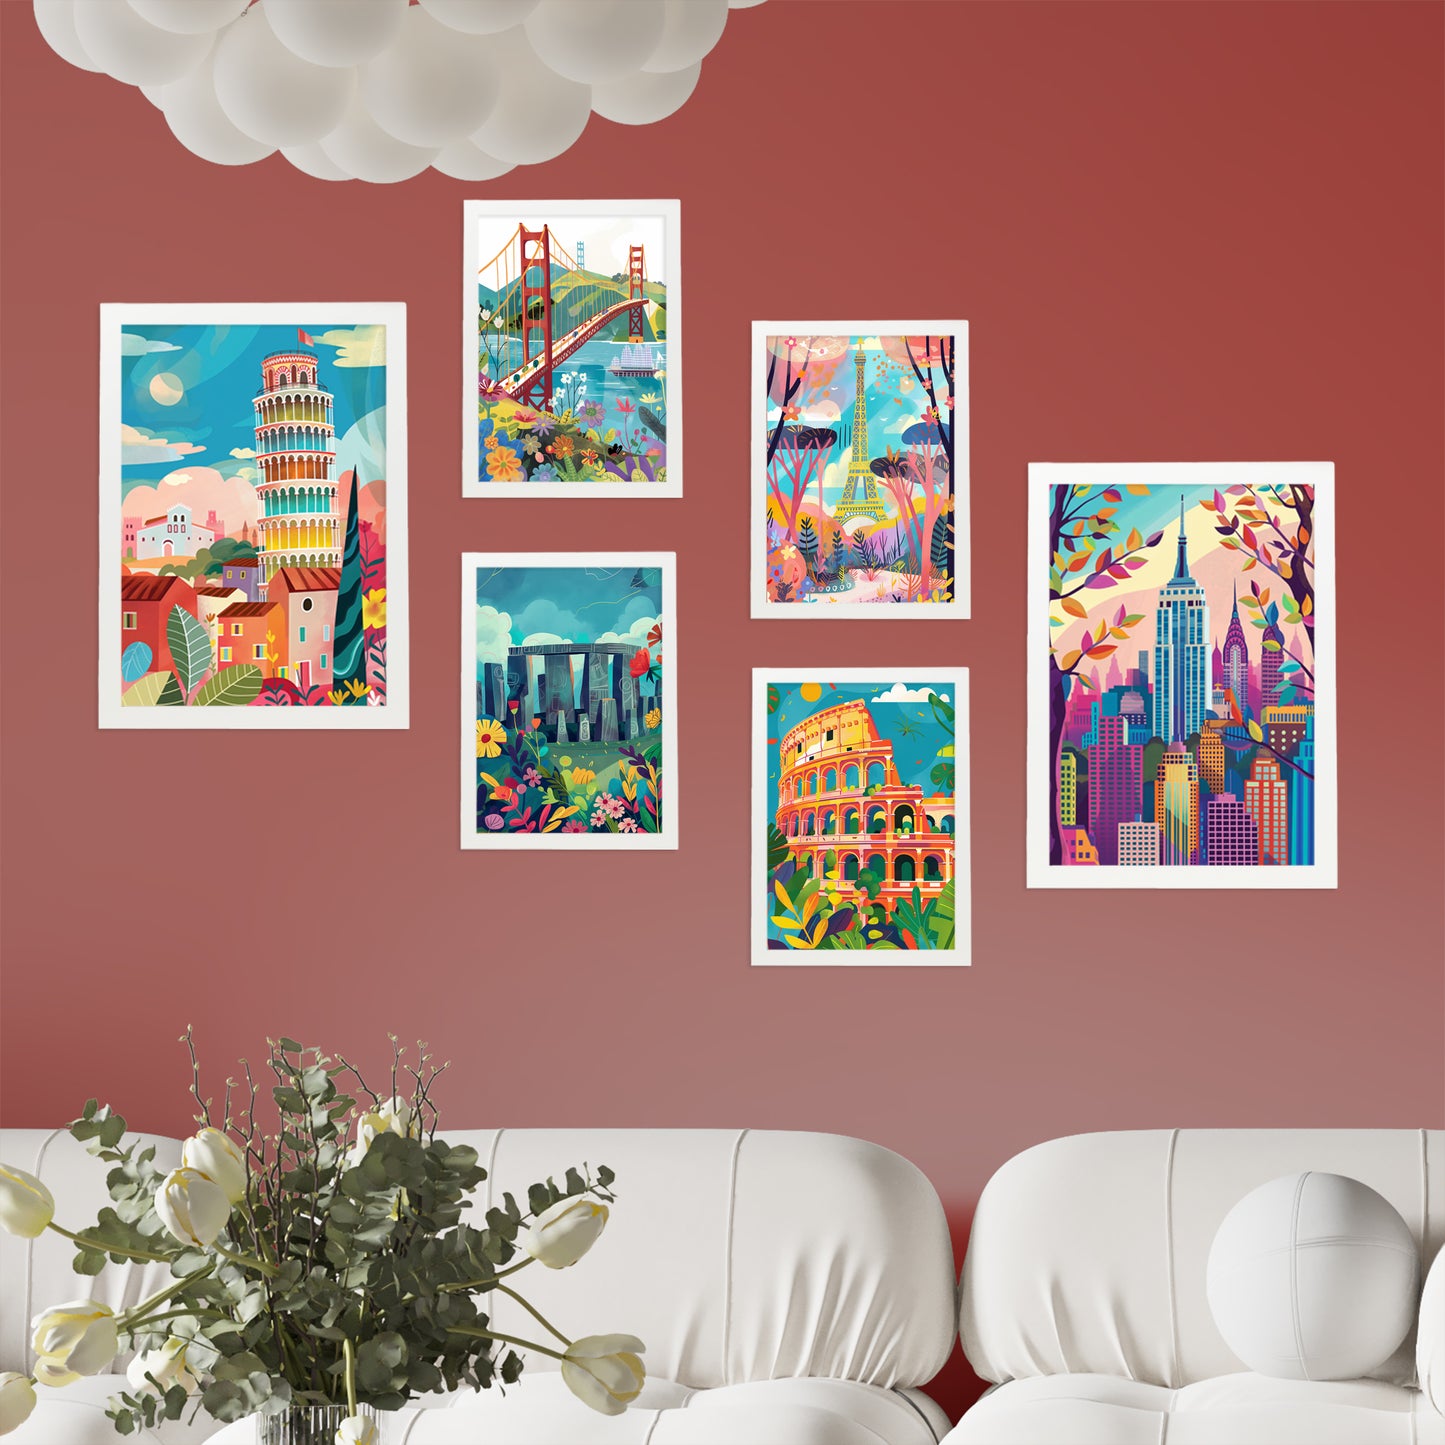 Monuments inspired by Mary Blair. Eiffel,Coliseo, Pisa, Golgen Gate, Stonehenge, Empire State